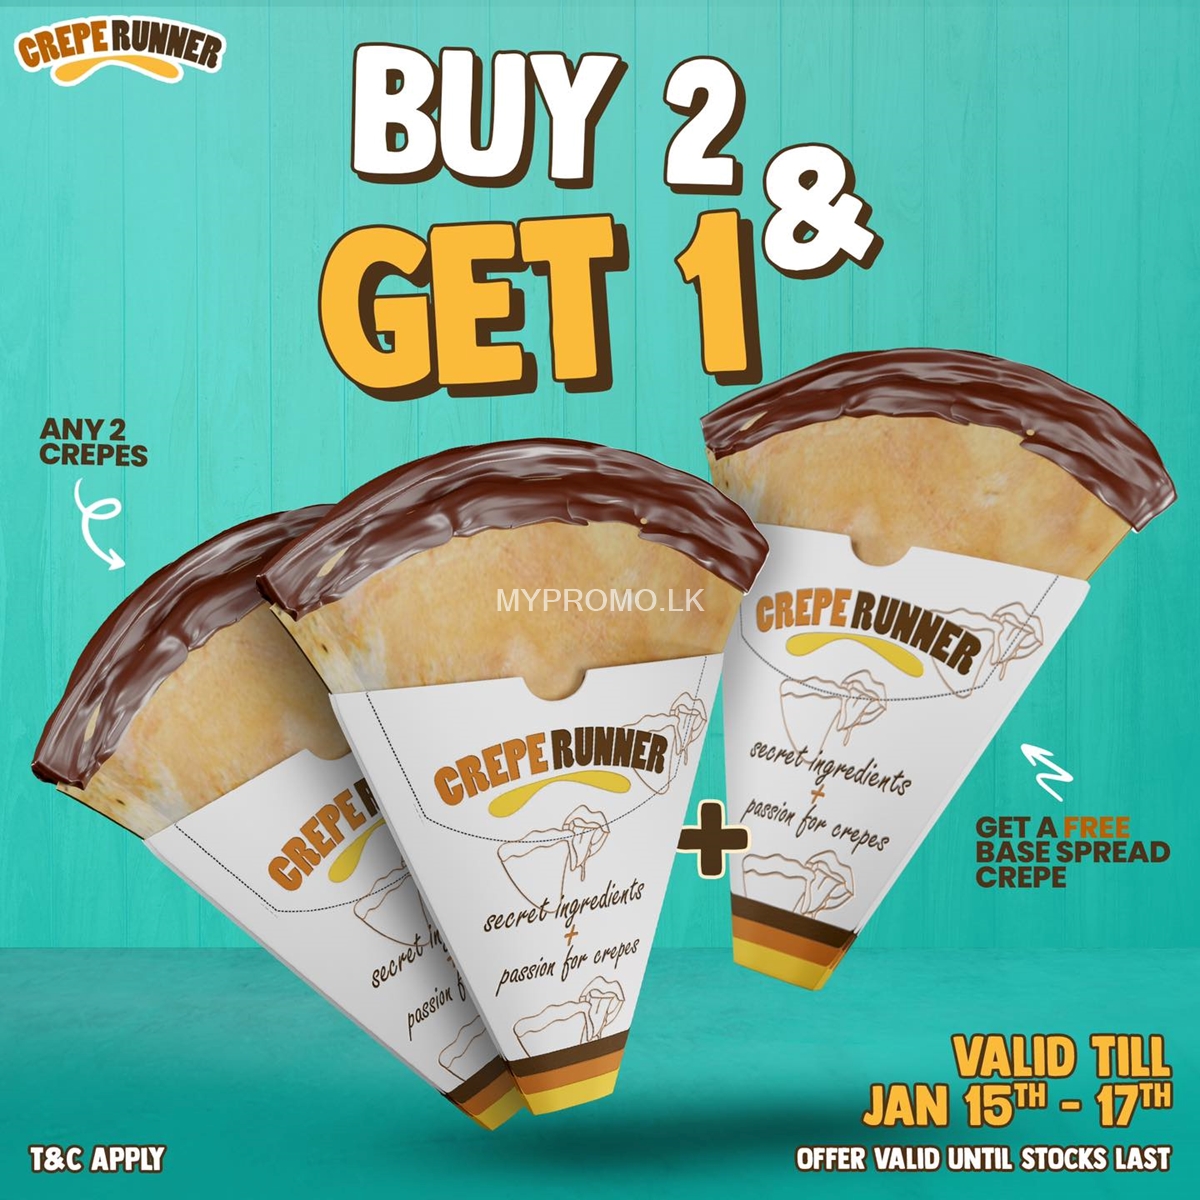 Get 1 FREE crepe (Any base spread) when you buy any 2 crepe at Crepe Runner 